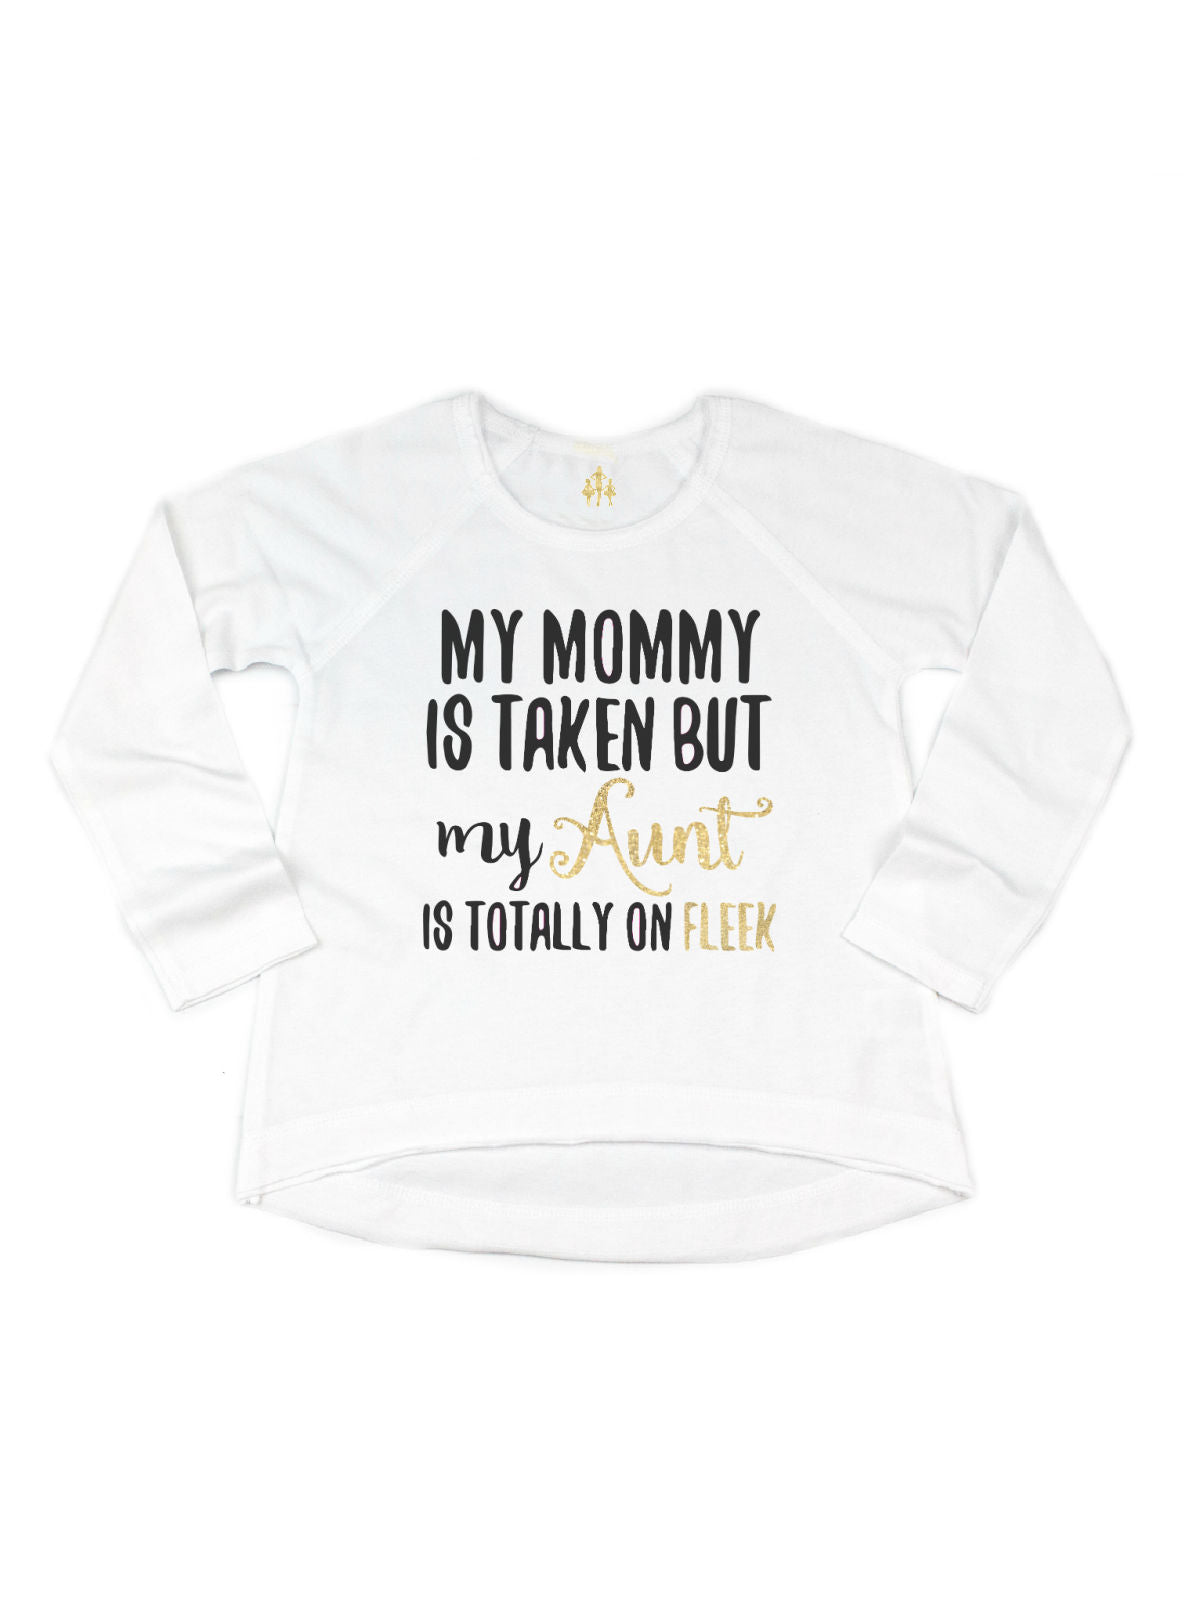 My Mommy Is Taken But My Aunt is Totally On Fleek Girls Short Sleeve Shirt